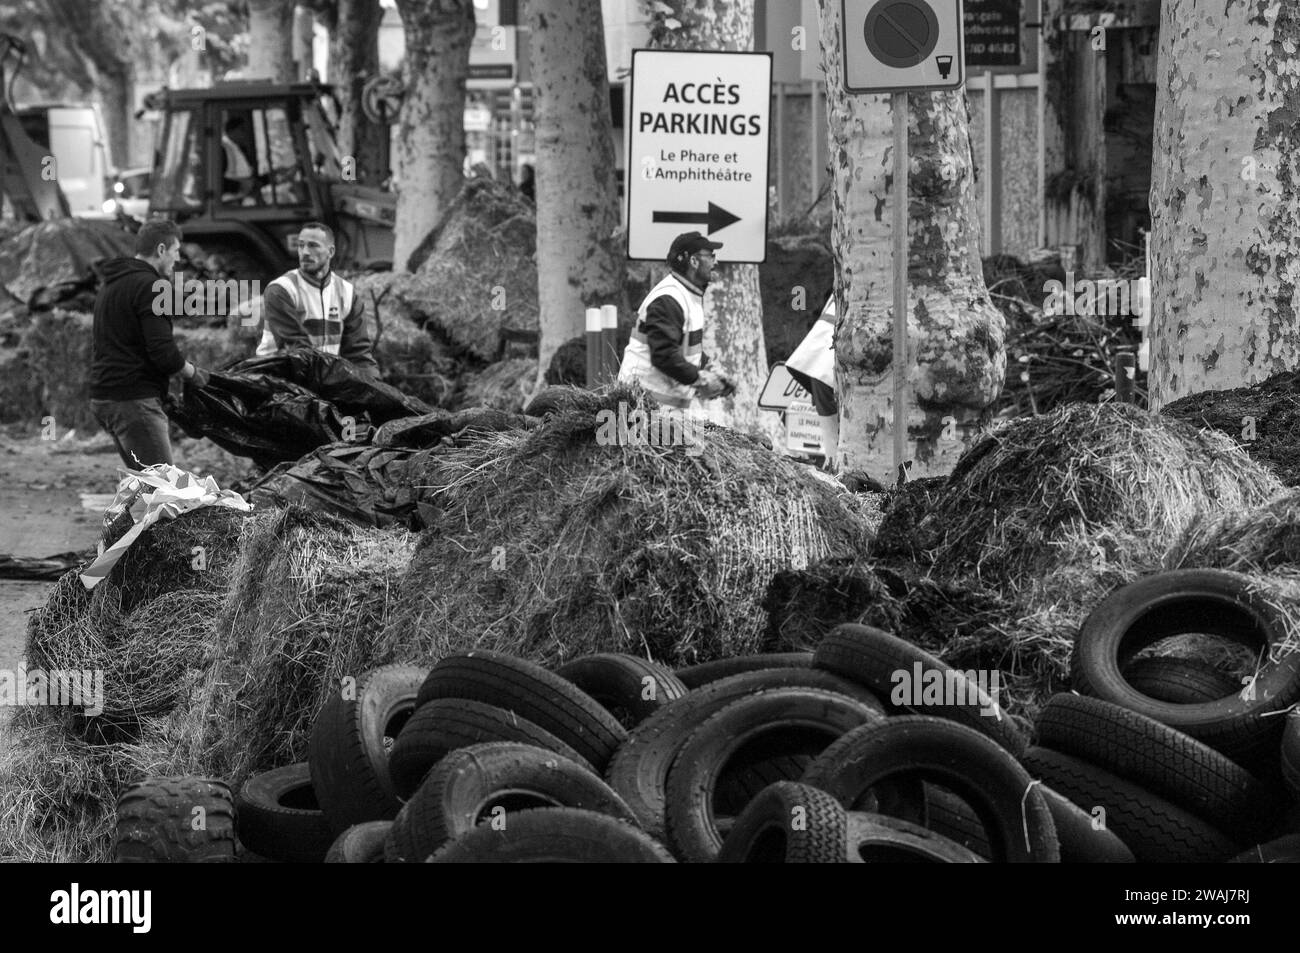 Workers clearing dumped tyres and manure after farmers protest,Quai Eugène Cavaignac, Cahors, Lot department, France Stock Photo